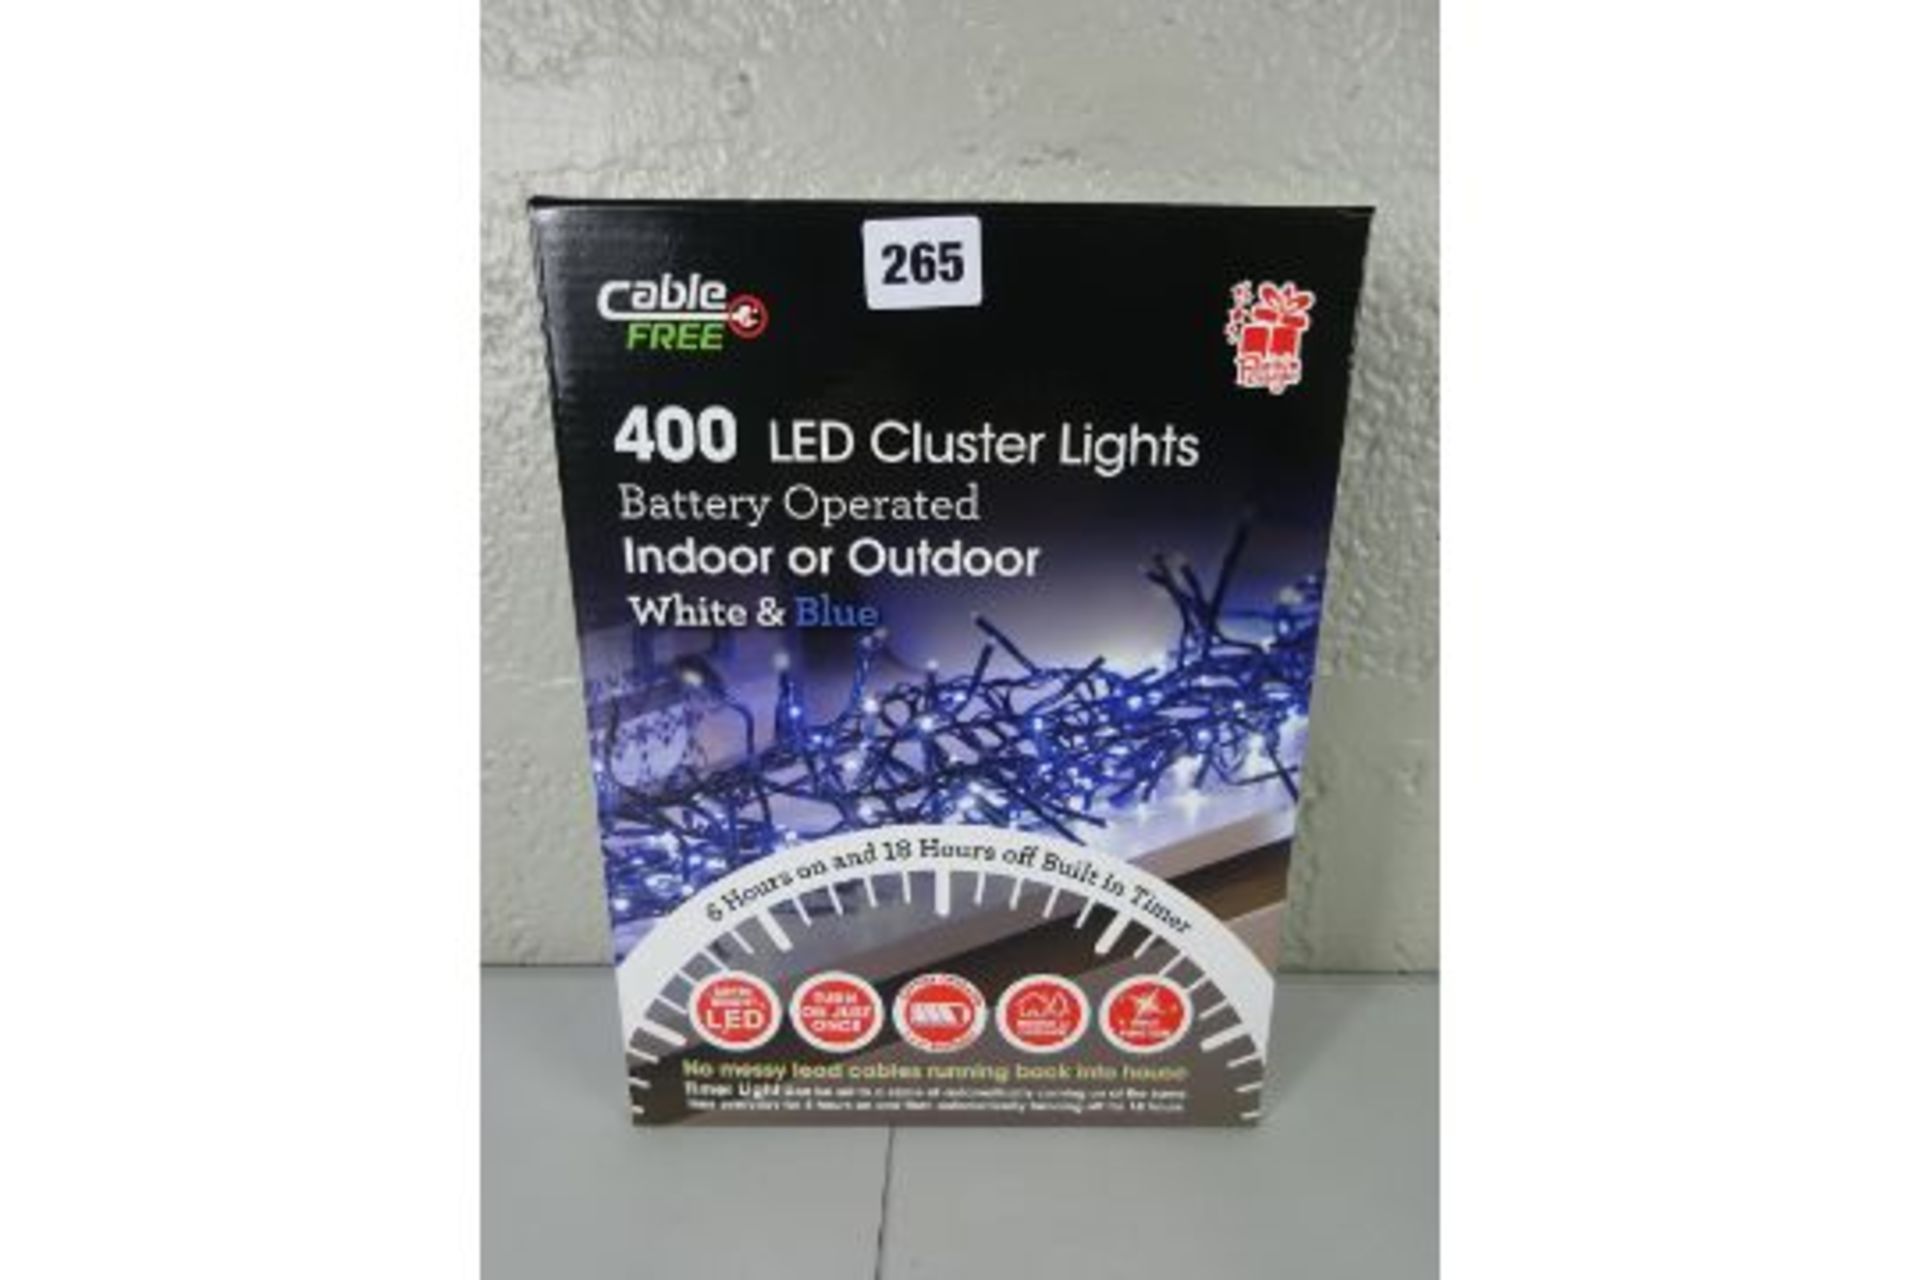 CABLE FREE 400 LED CLUSTER LIGHTS WHITE & BLUE